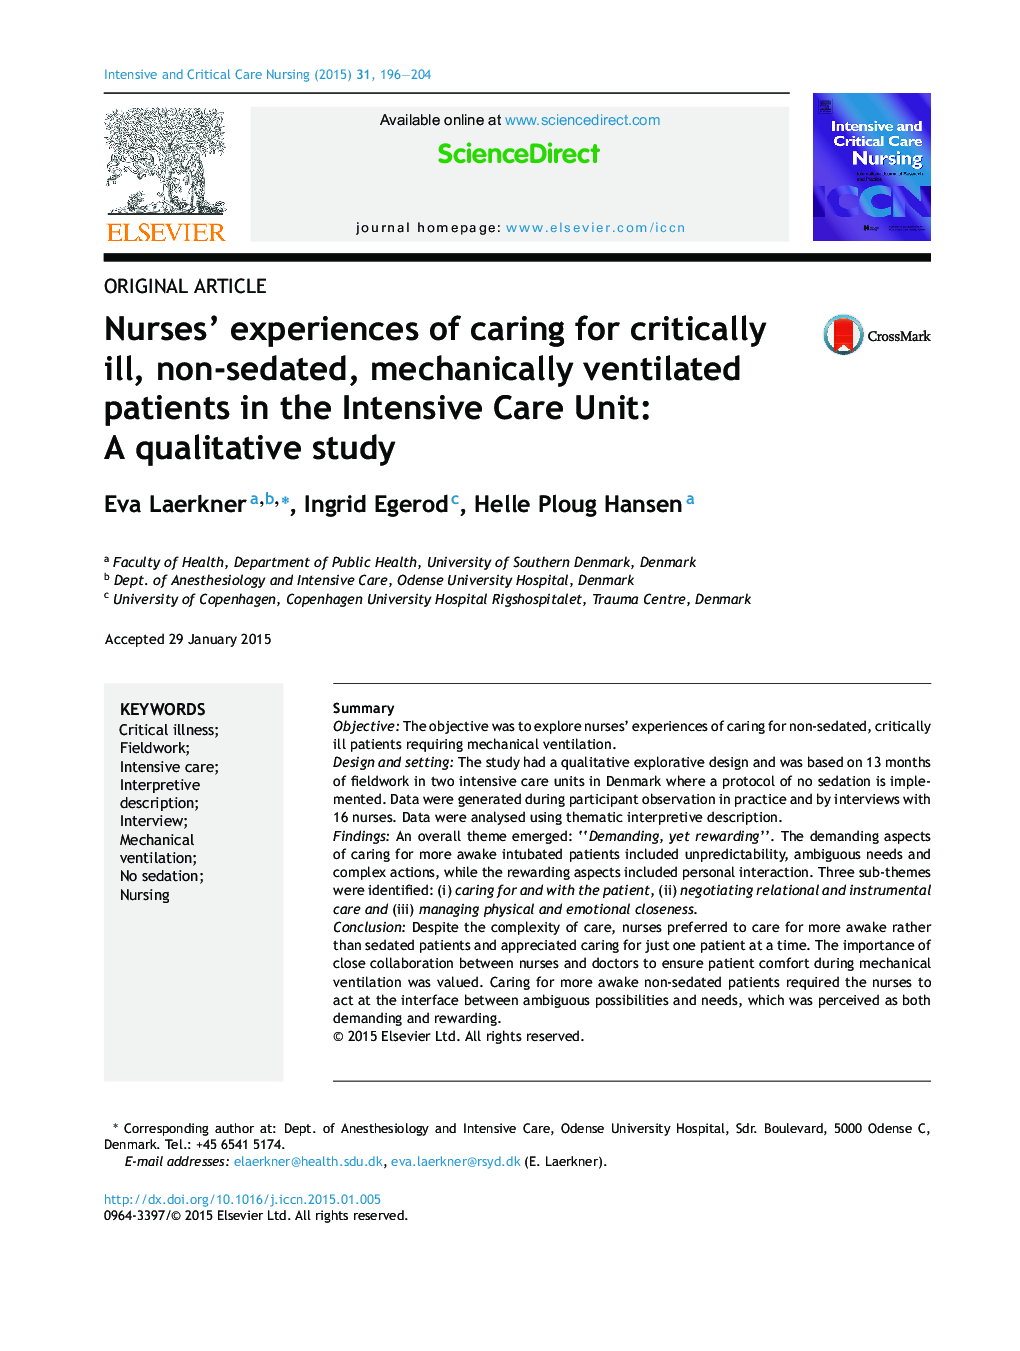 Nurses’ experiences of caring for critically ill, non-sedated, mechanically ventilated patients in the Intensive Care Unit: A qualitative study